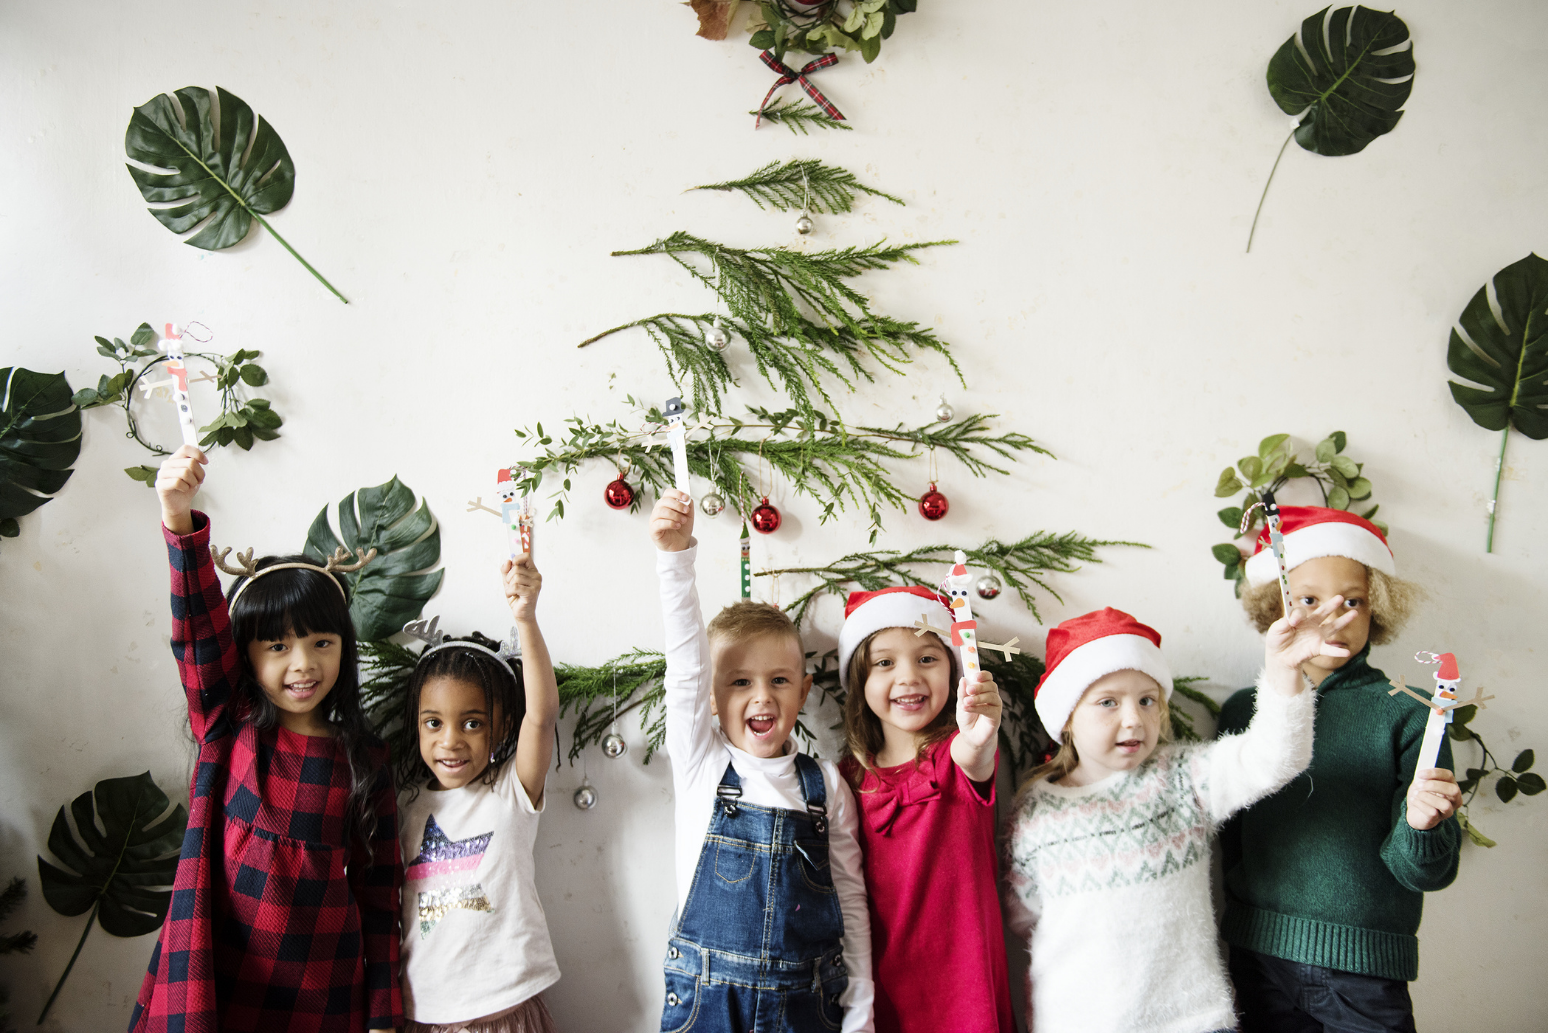 provide support for kids through hectic holiday season